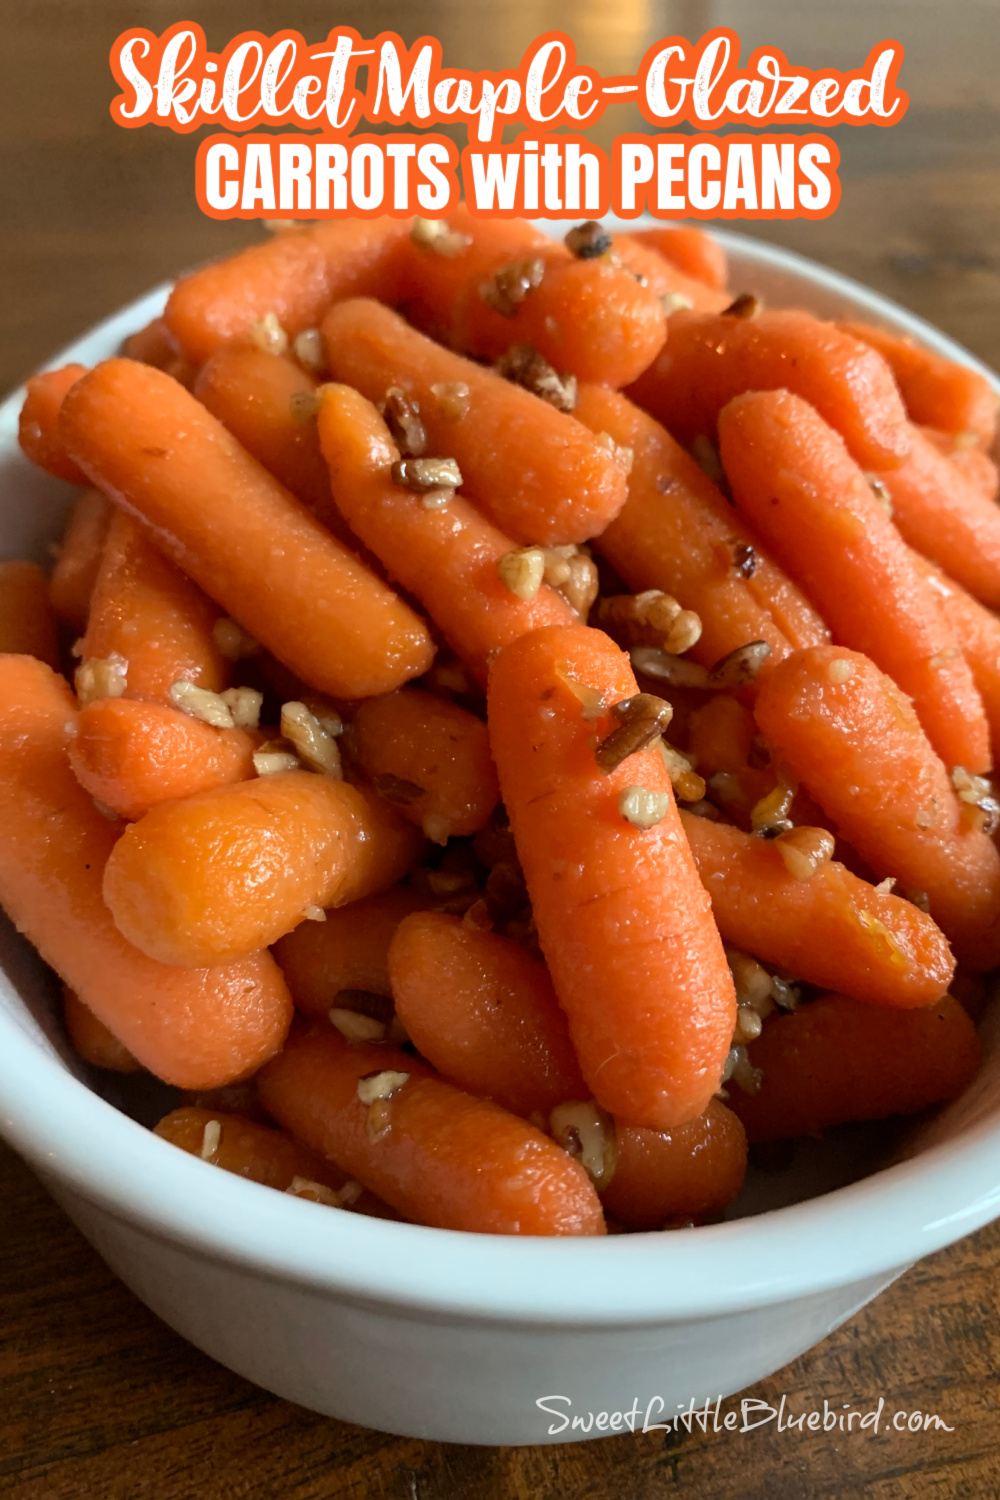 Skillet Maple-Glazed Carrots with Pecans